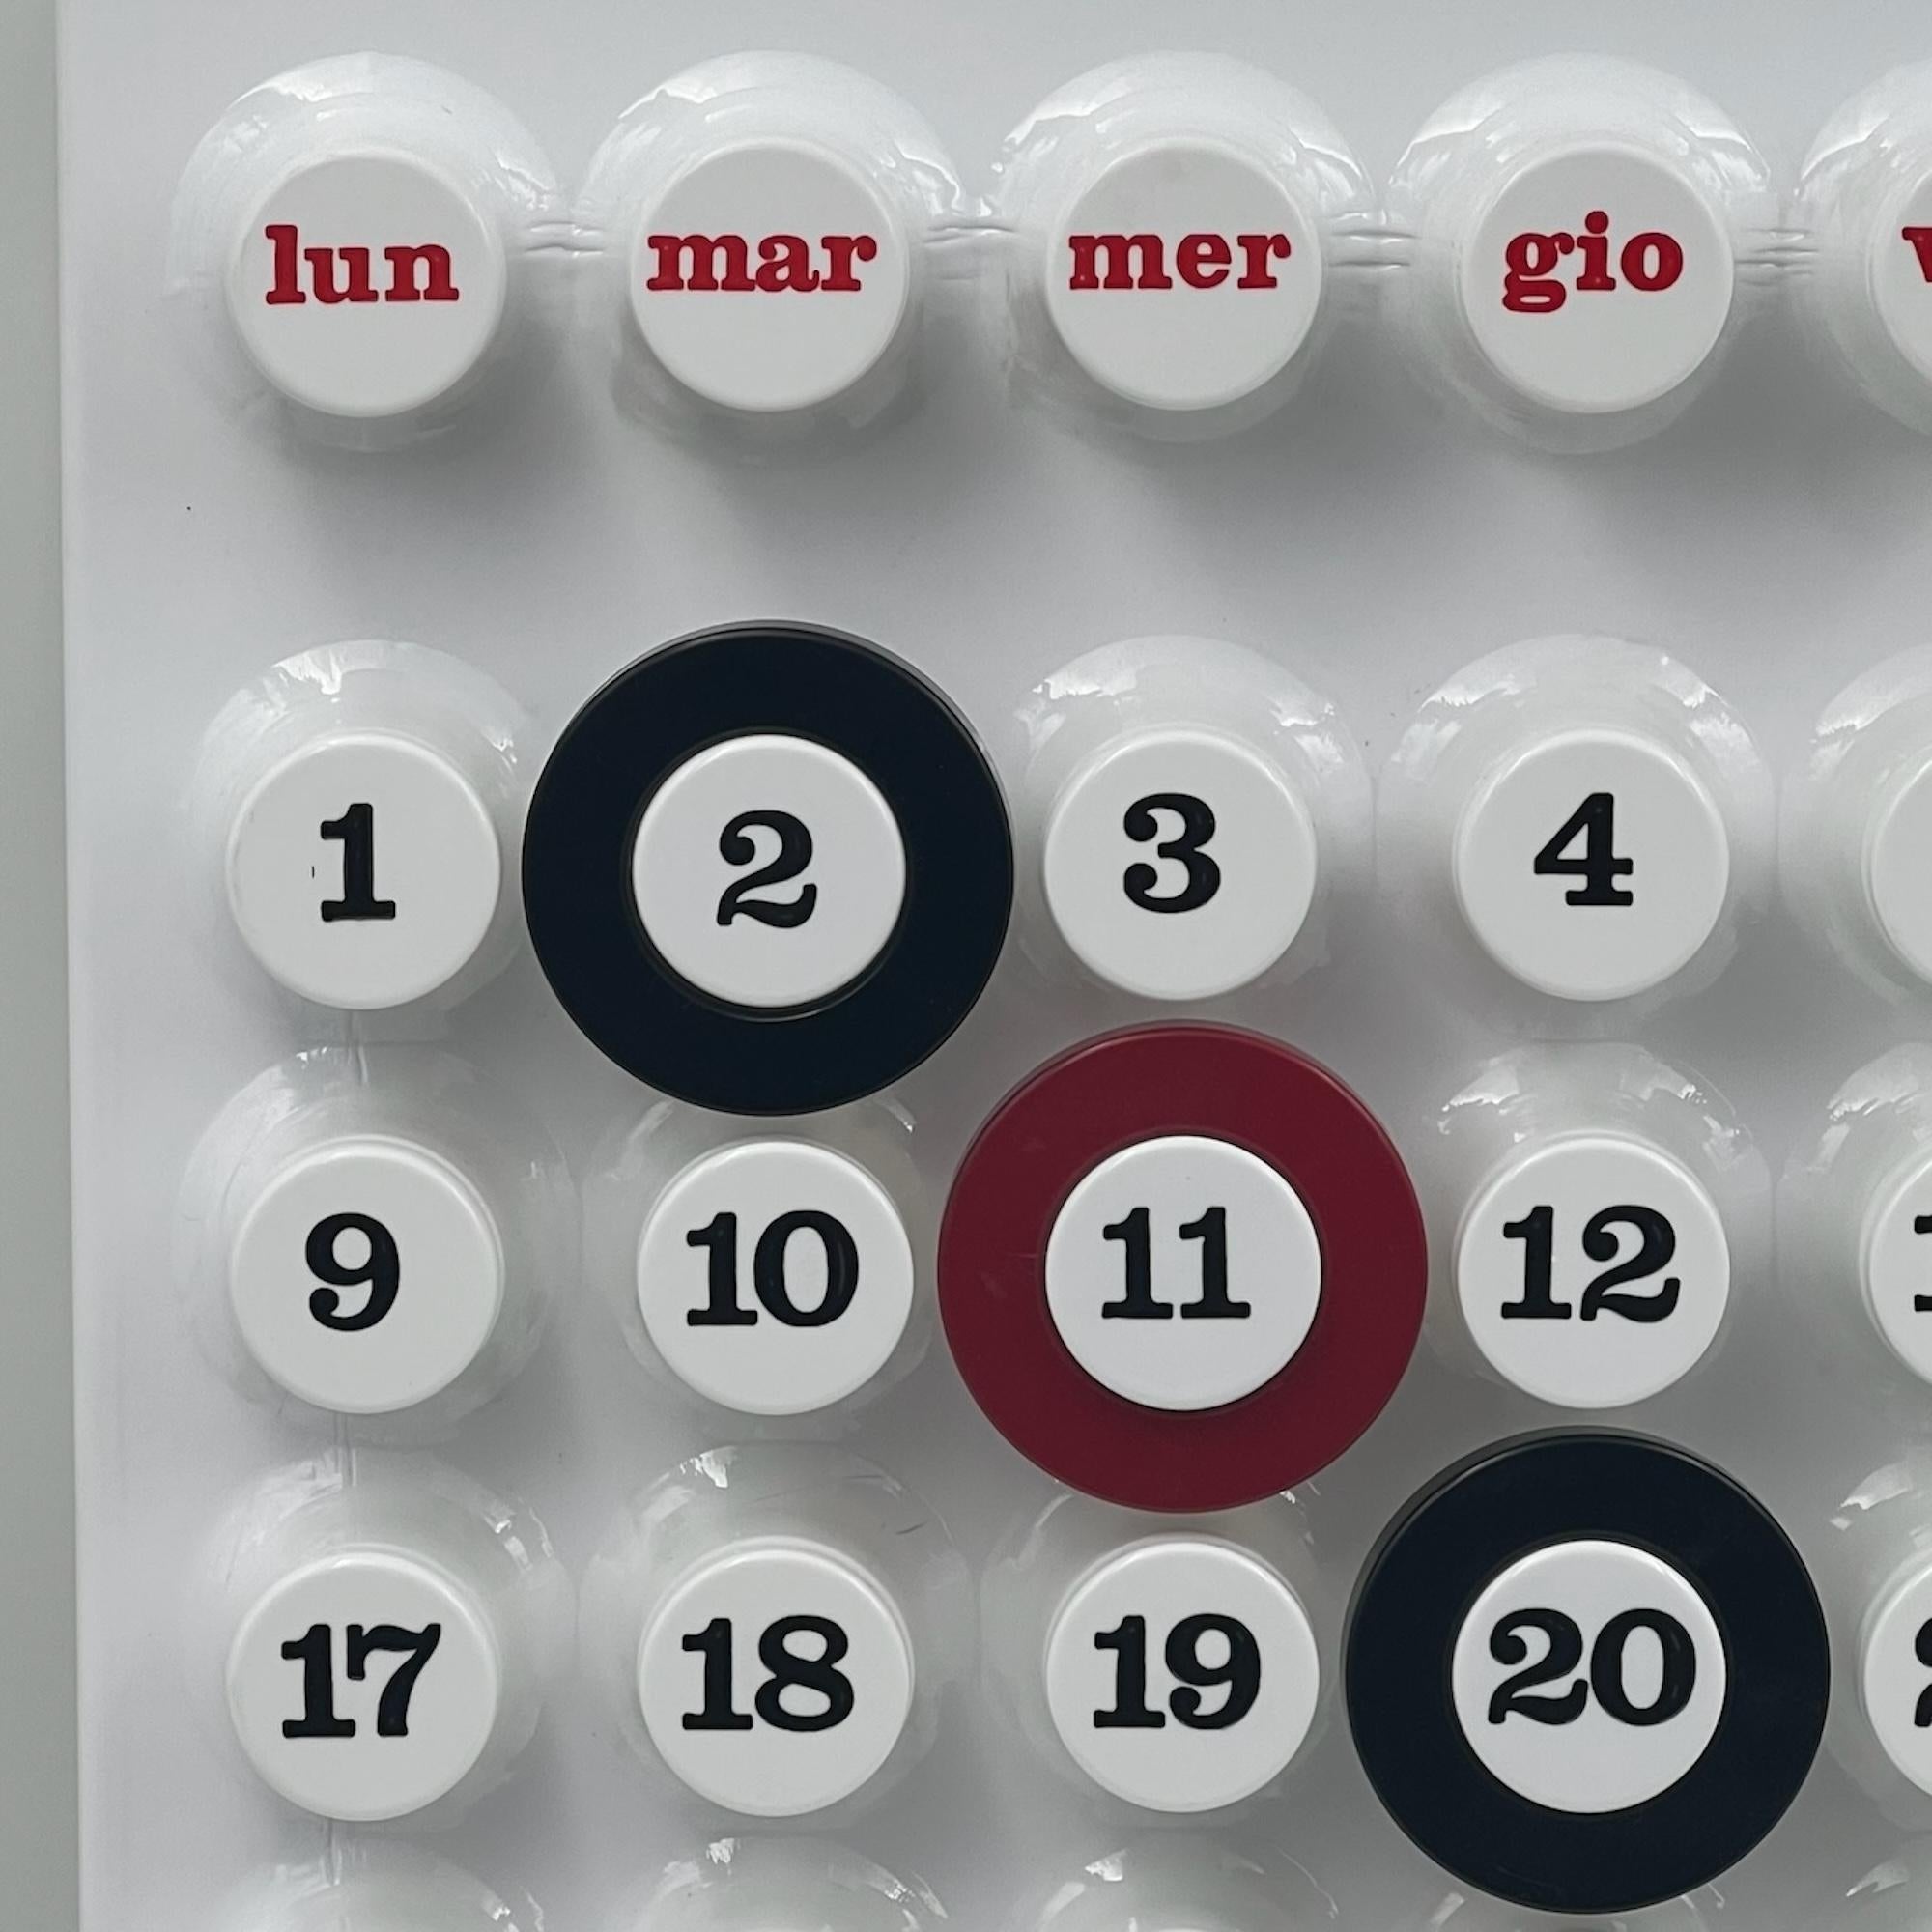 “Ring-a-Date” wall calendar, designed by Giorgio Della Beffa for Euroway Torino in the 1970s, a space age icon that epitomizes the retro-futuristic charm of space age era.

Its unique “ring-a-date” mechanism allows users to use the three rings to